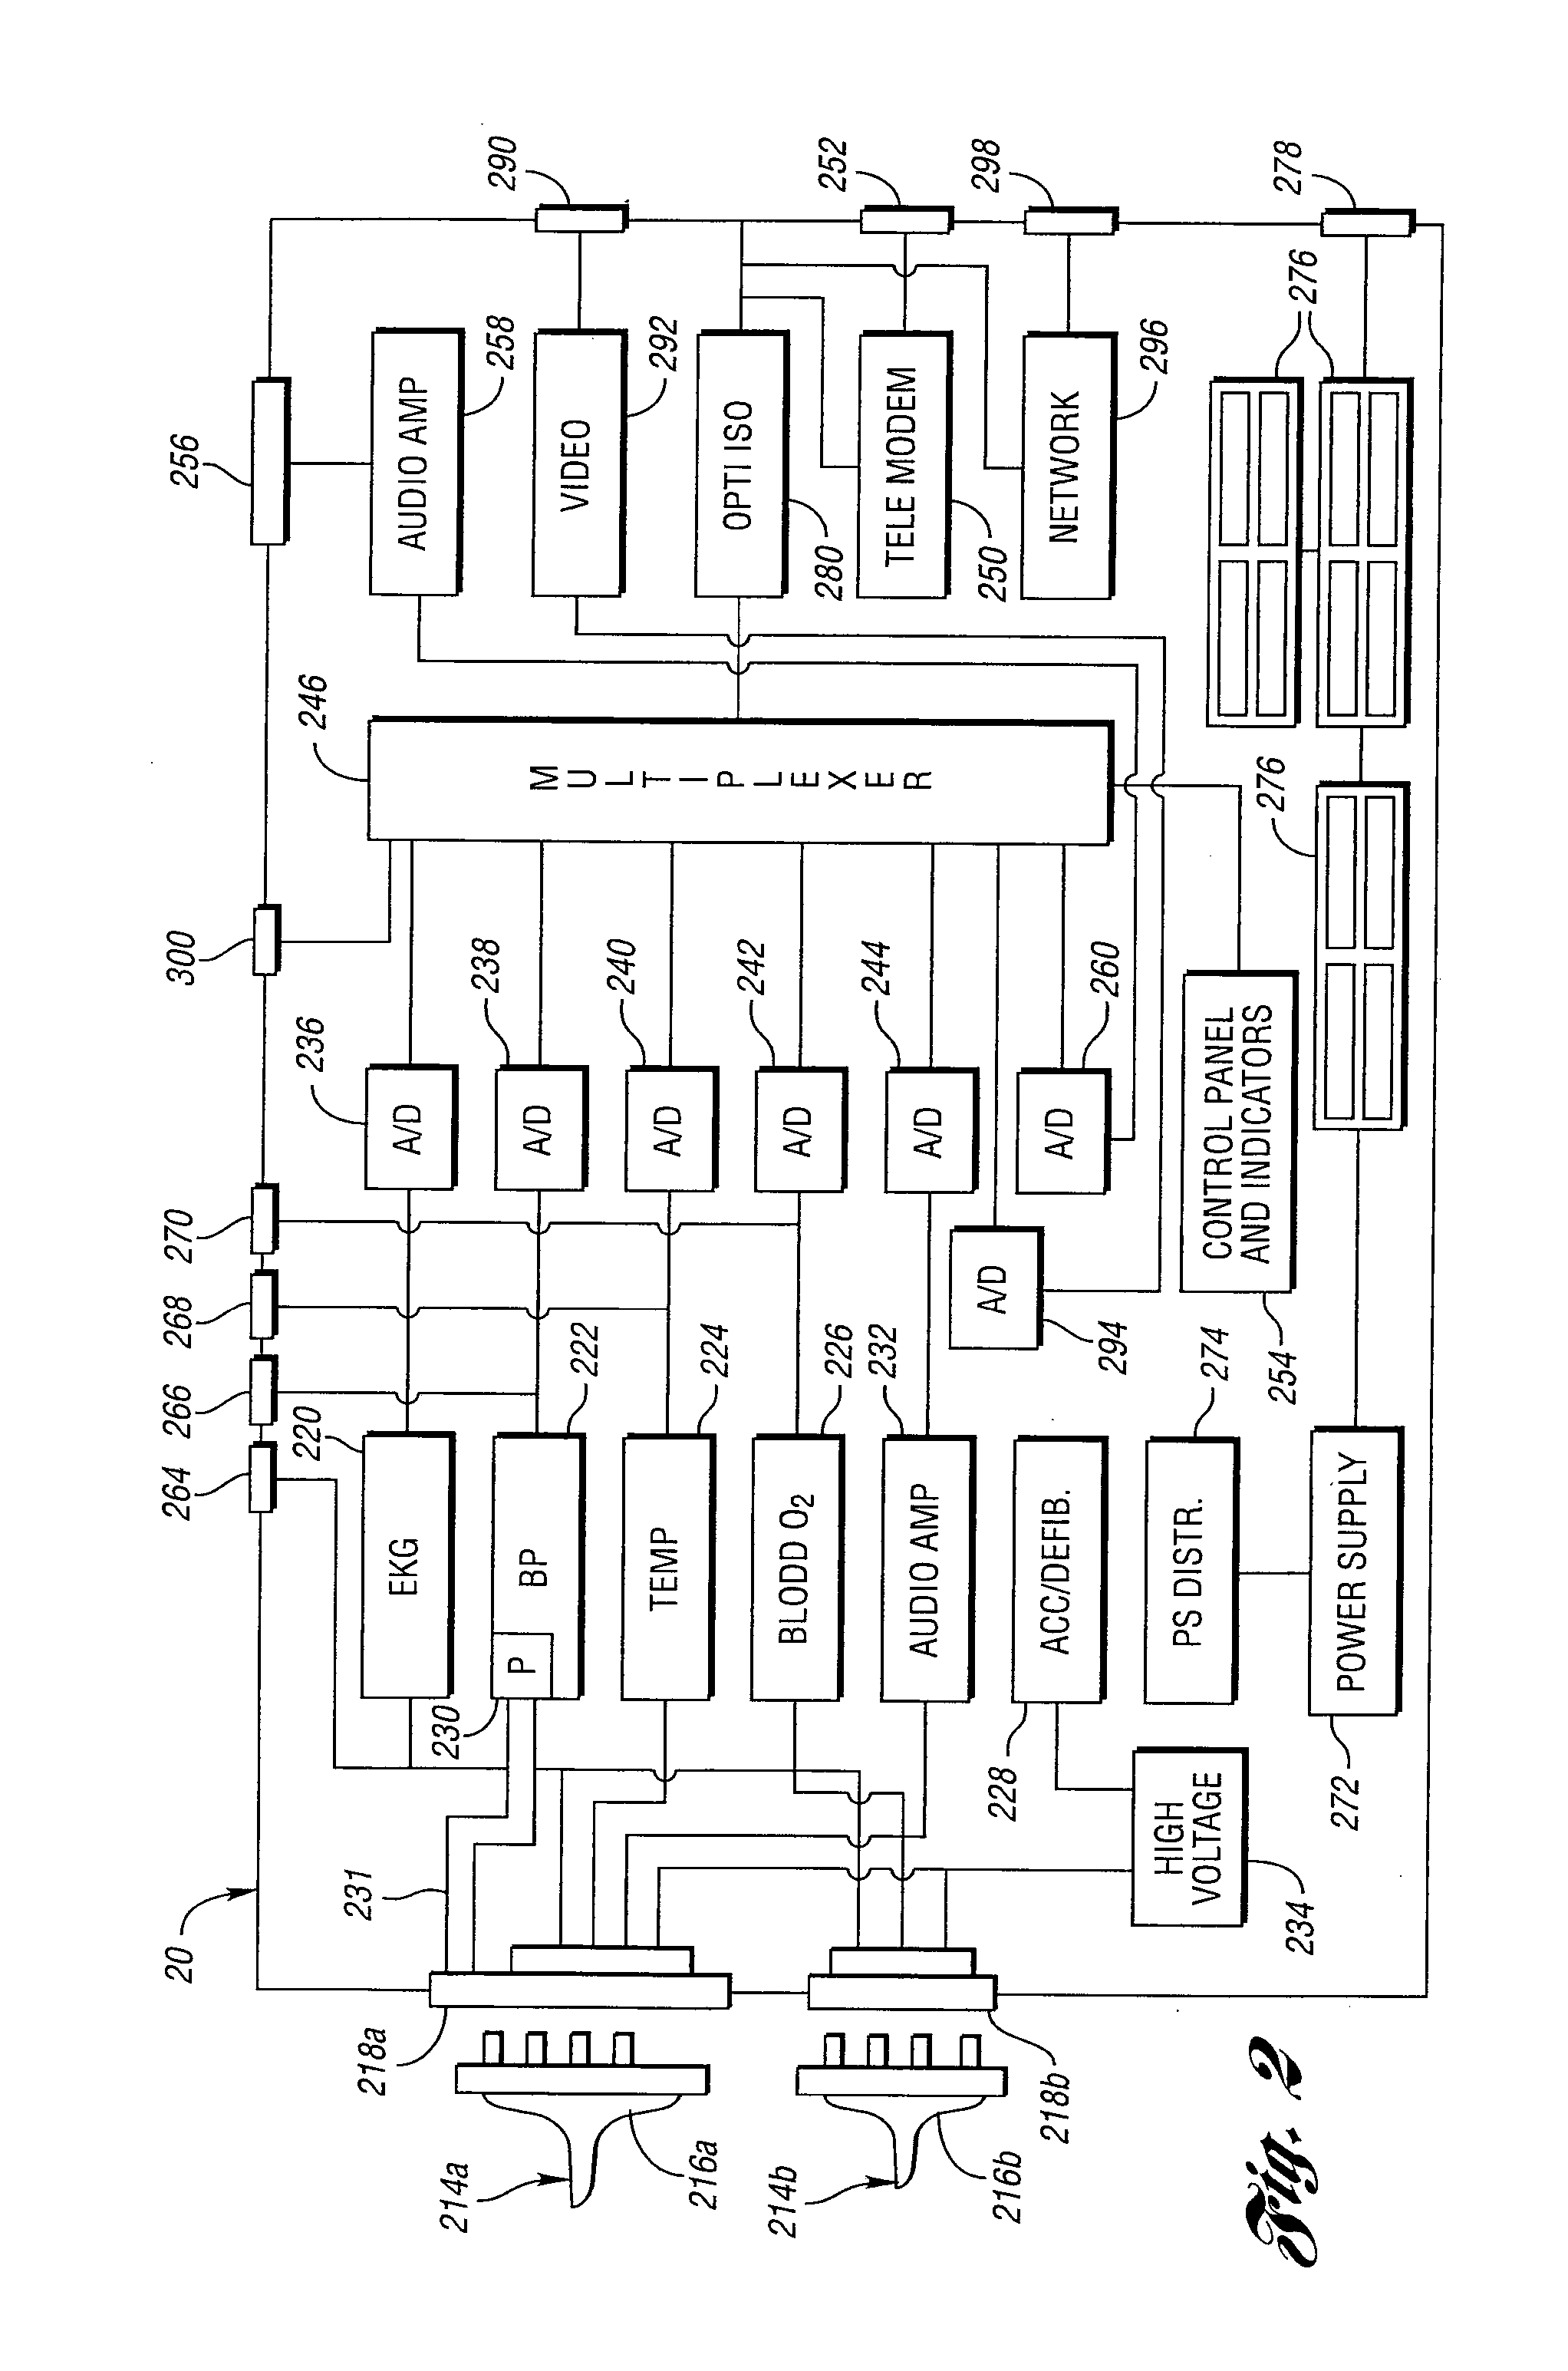 Method for remote medical consultation and care